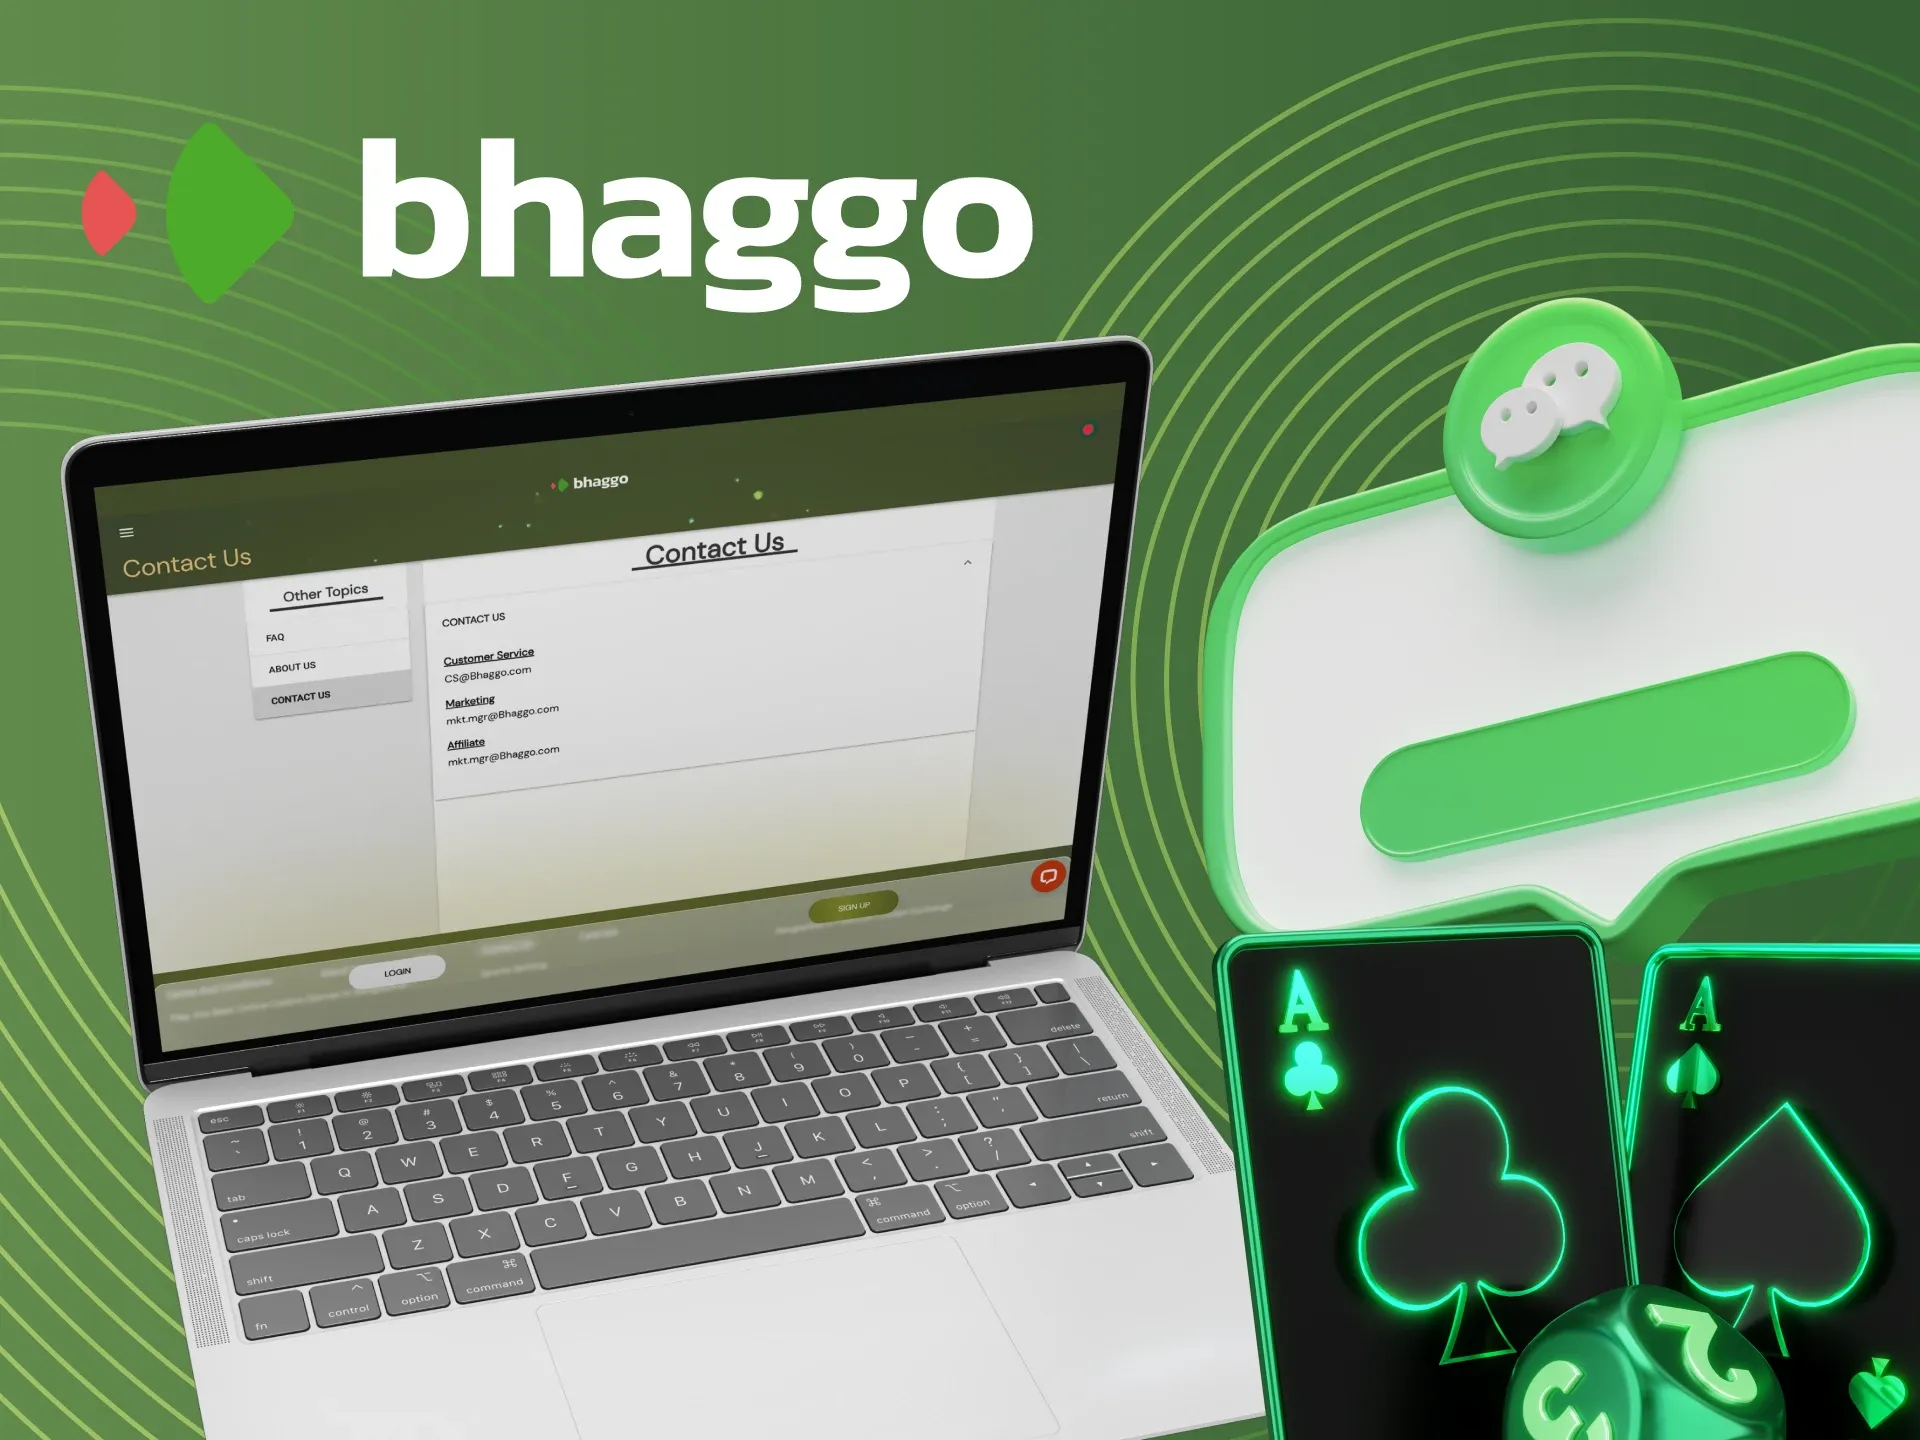 What questions can I write to the Bhaggo online casino support service.